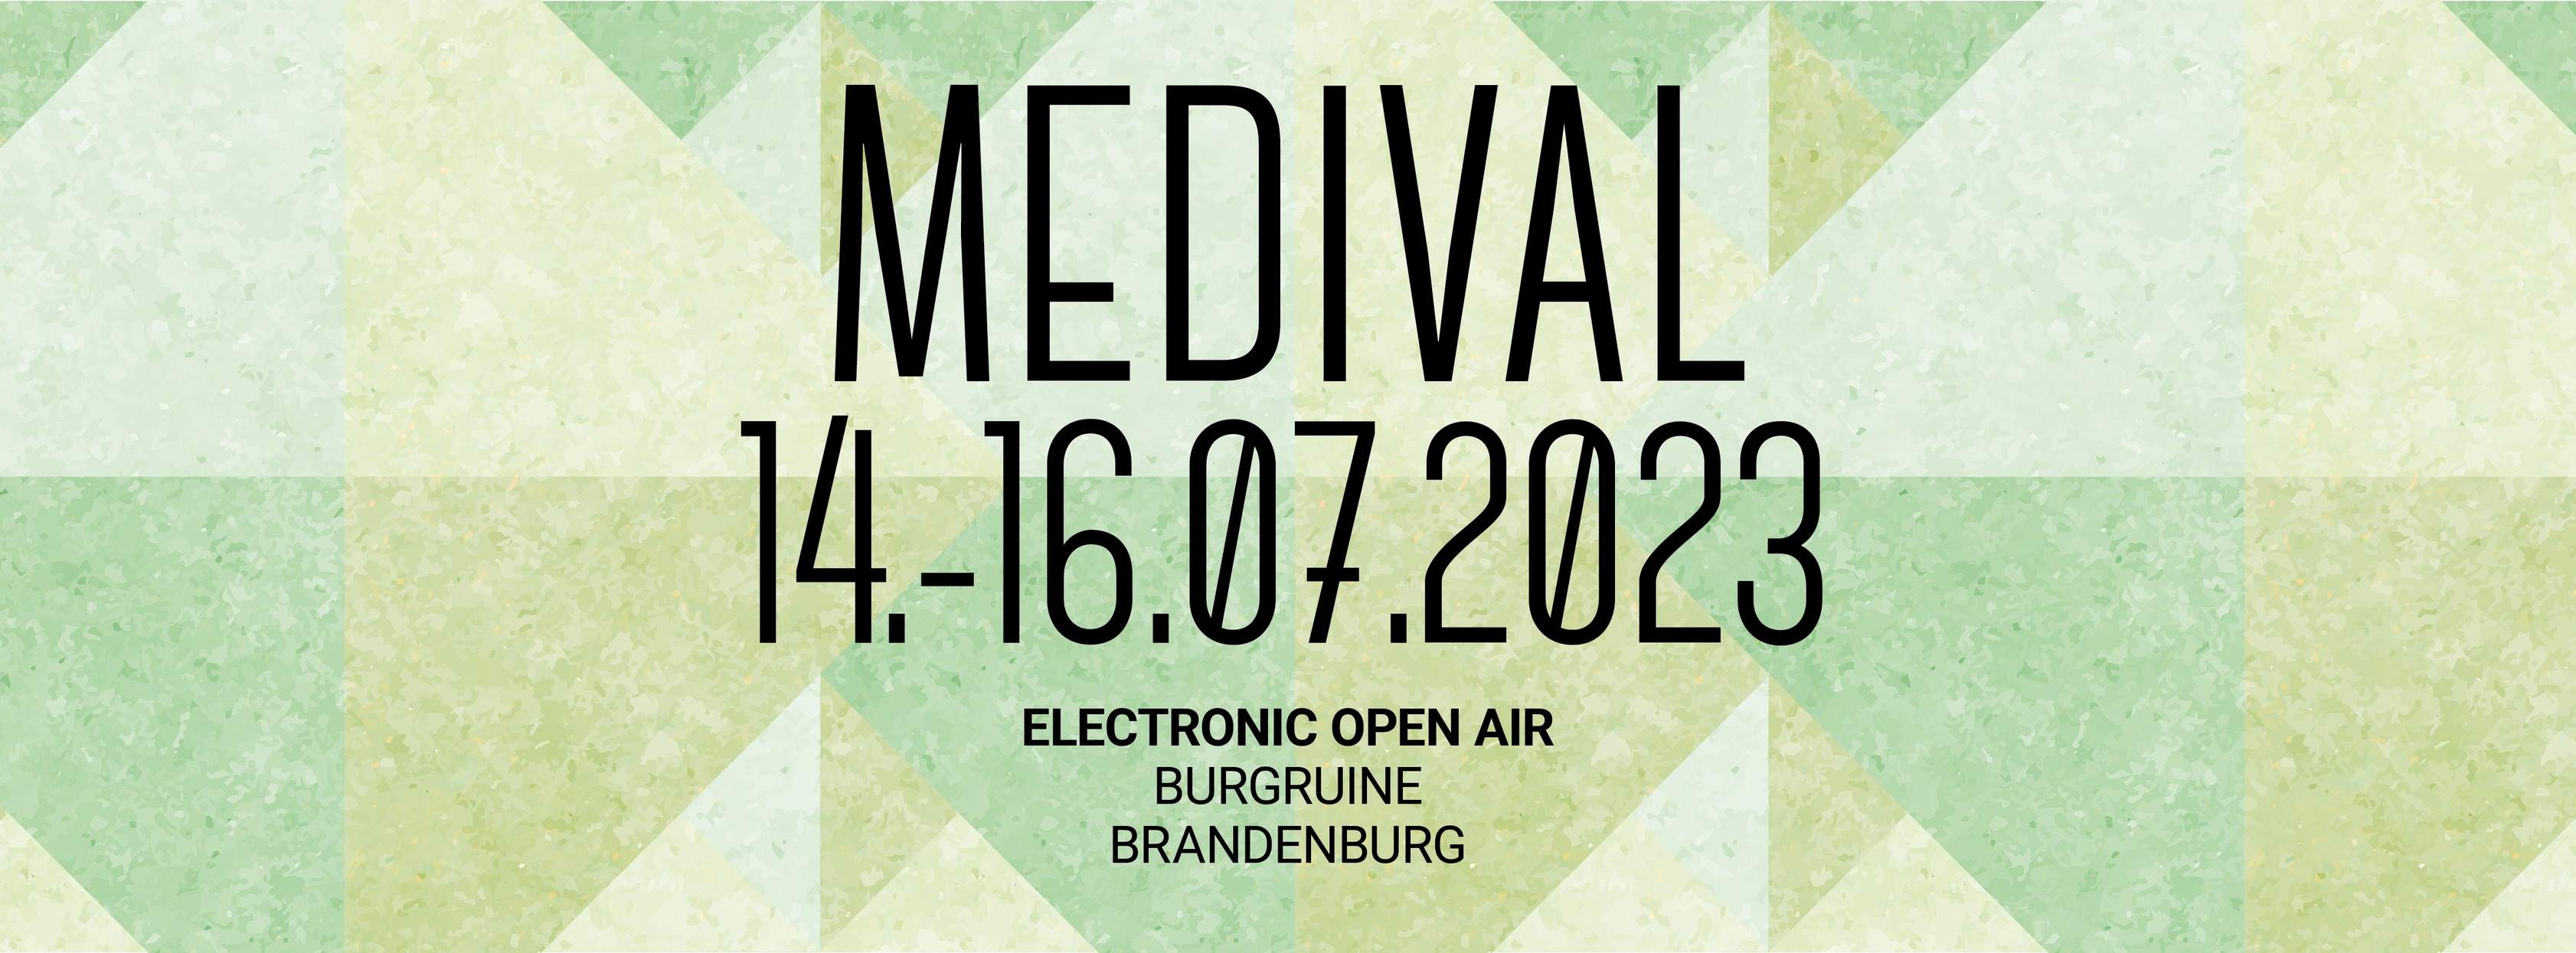 Medival Electronic Open Air - フライヤー表